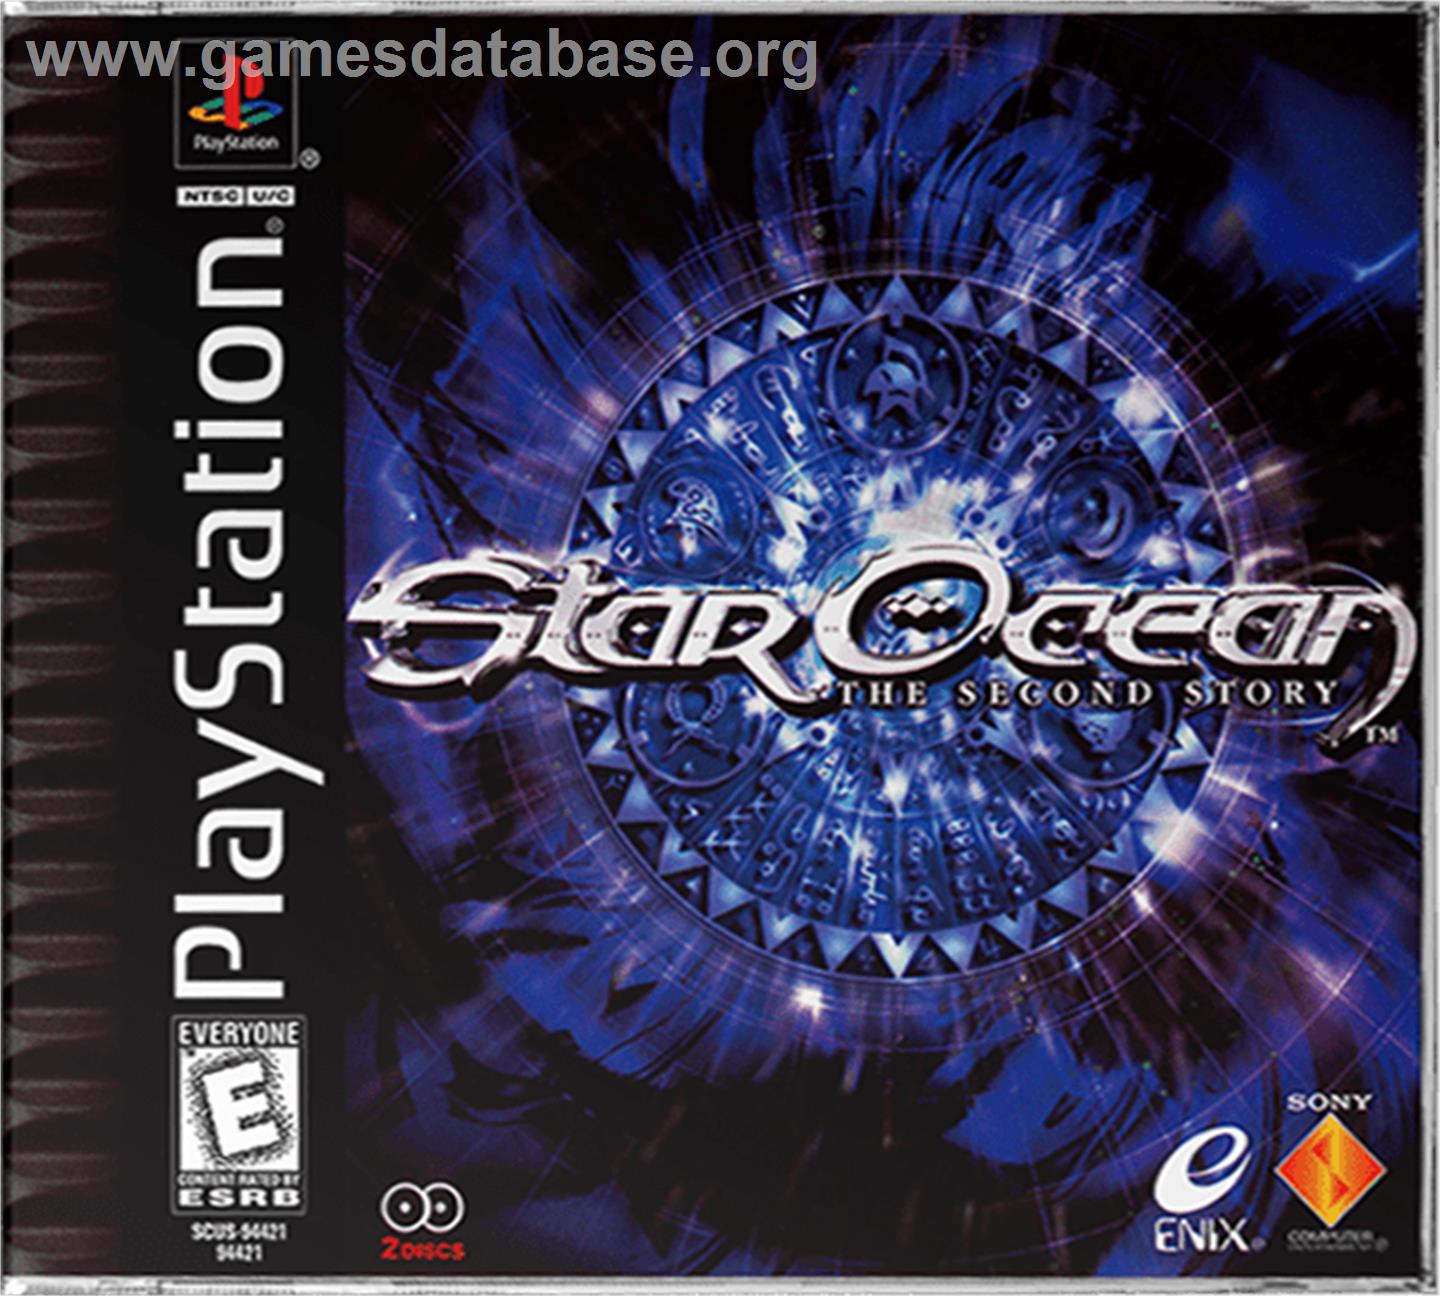 Star Ocean: The Second Story - Sony Playstation - Artwork - Box